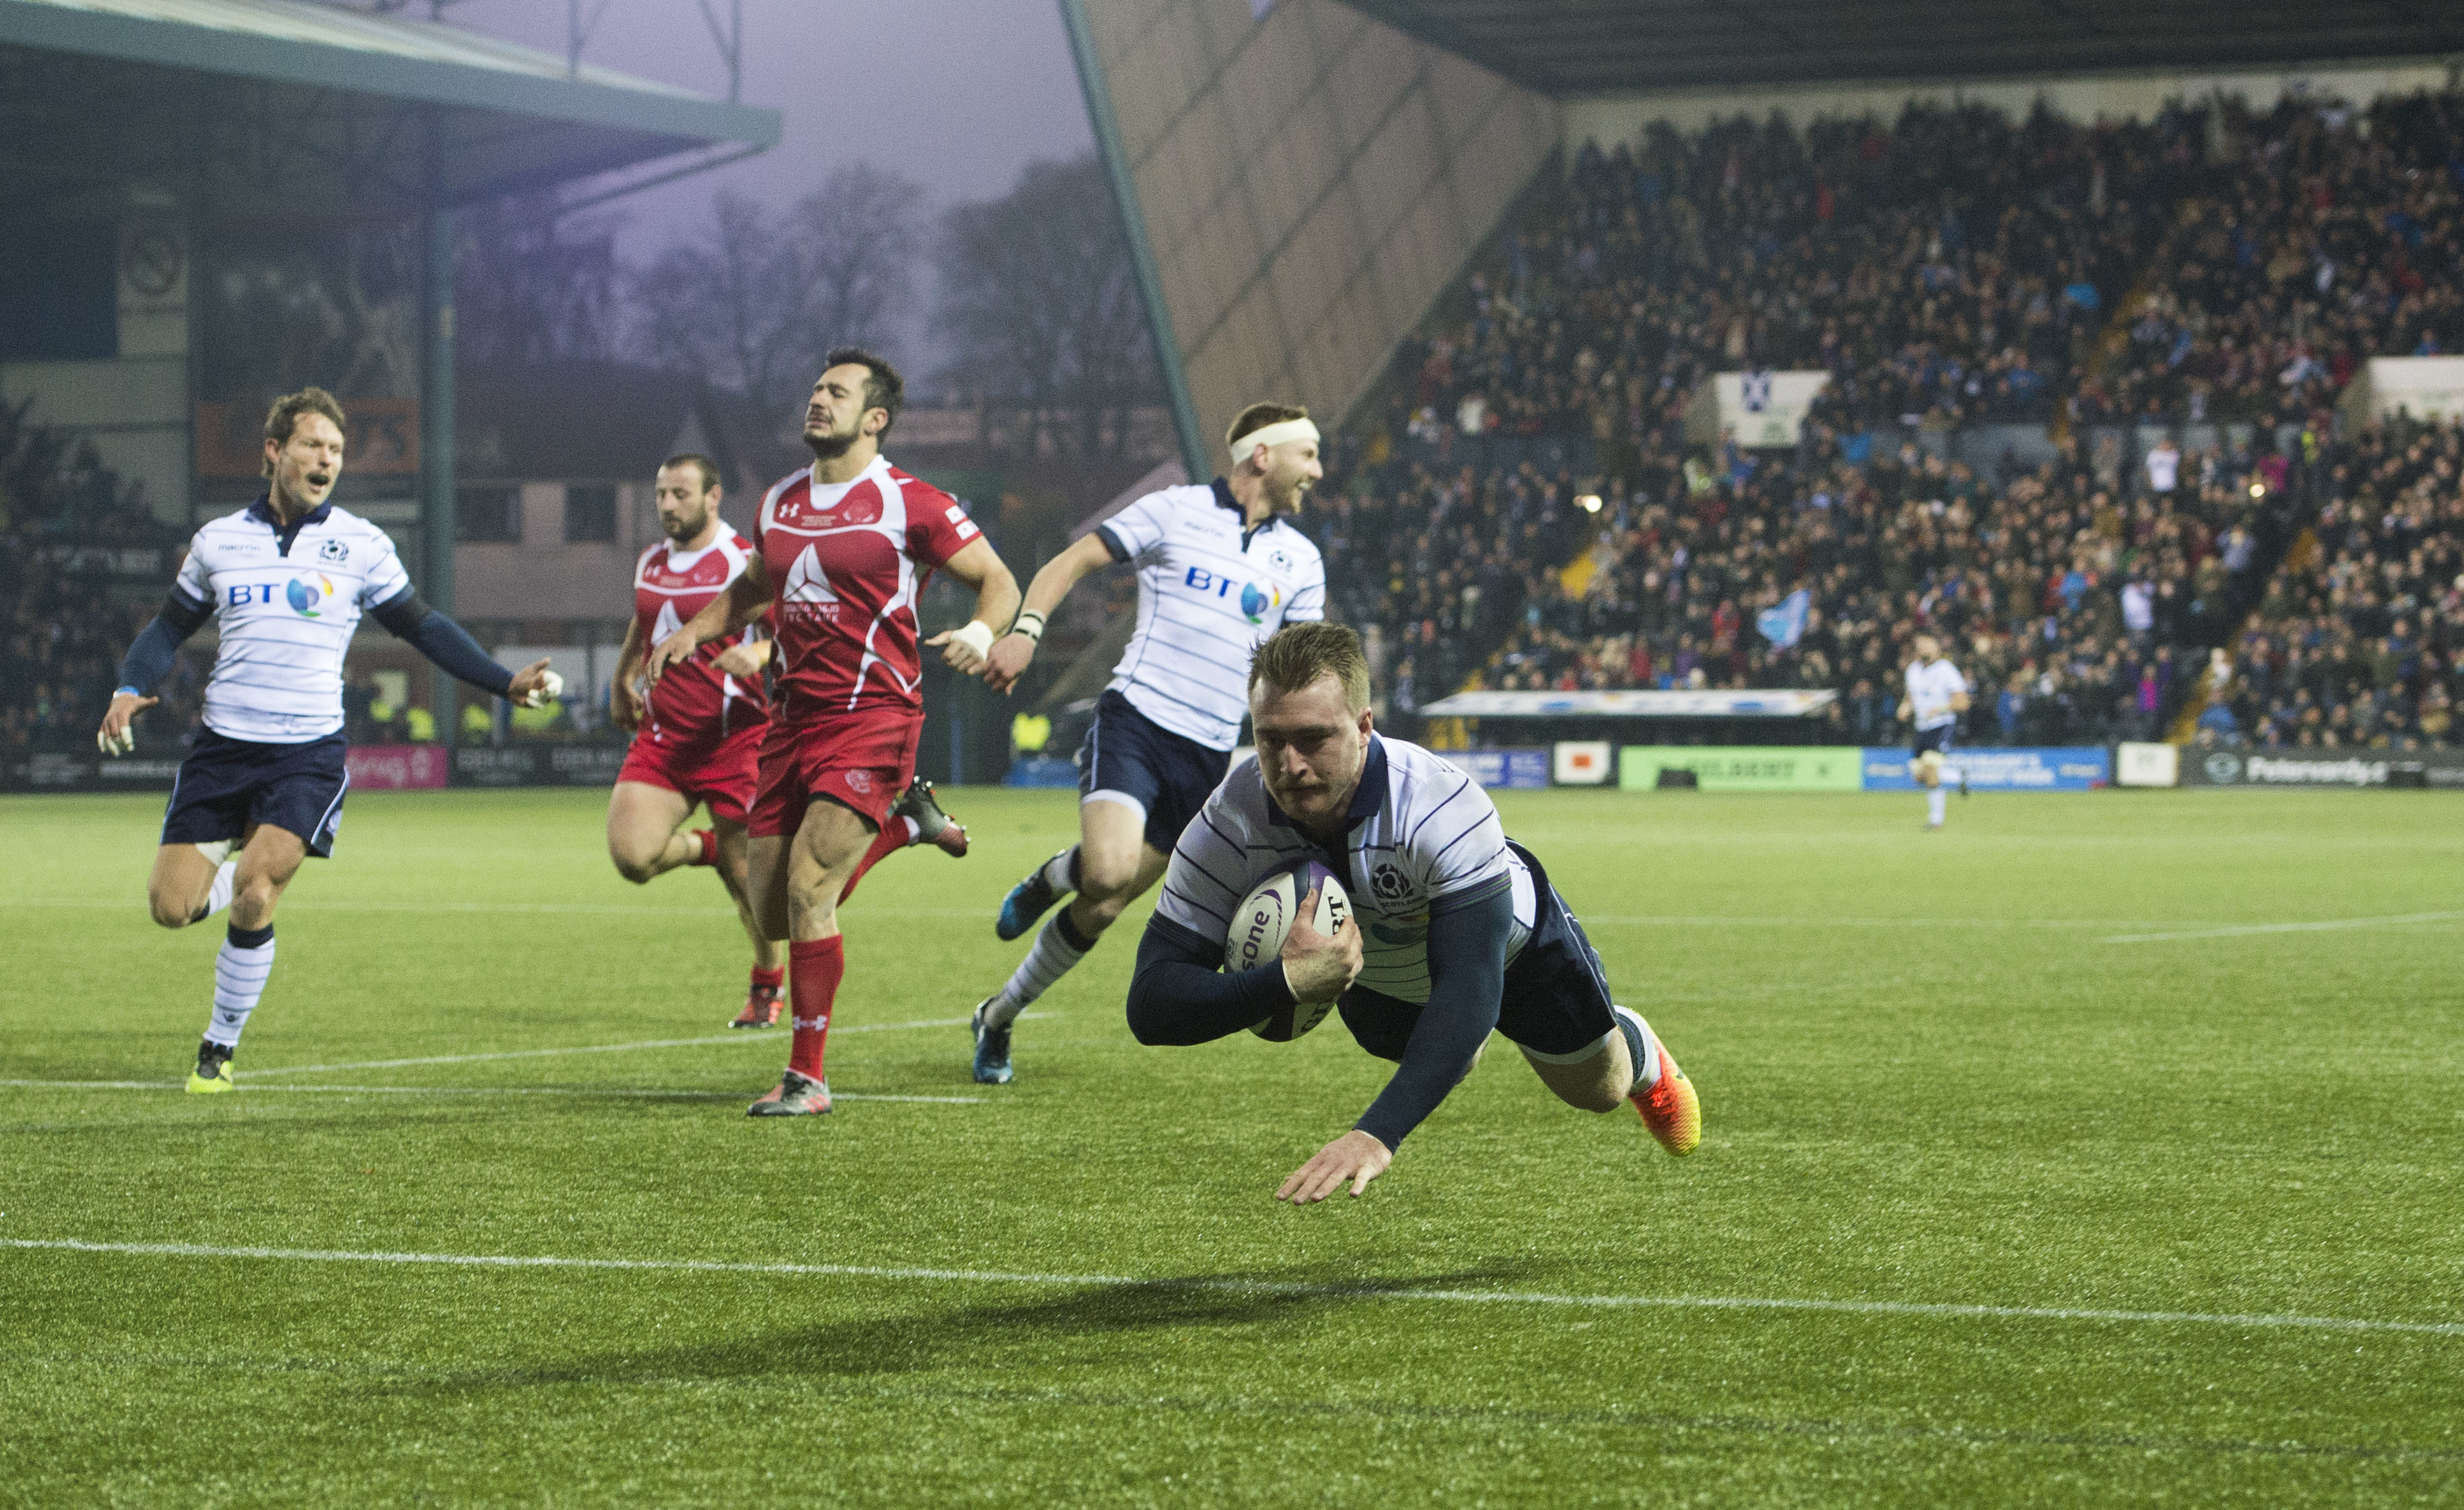 Stuart Hogg scores his second and Scotland's sixth try against Georgia at Kilmarnock.